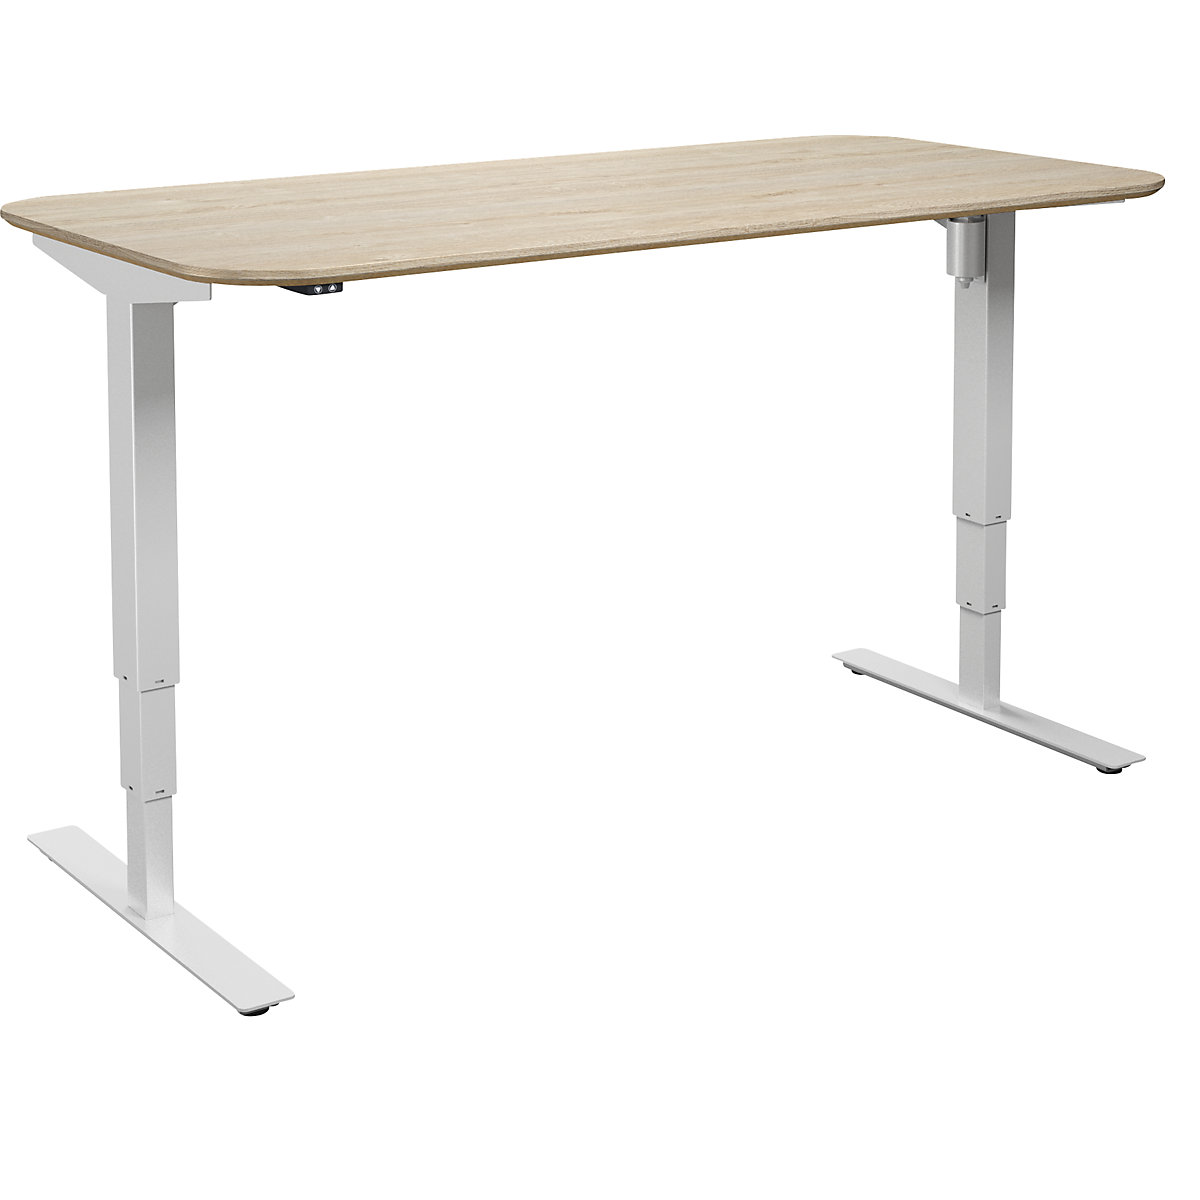 Atlanta Trend desk, electrically height adjustable, straight, rounded corners, WxD 1400 x 800 mm, oak/white-15